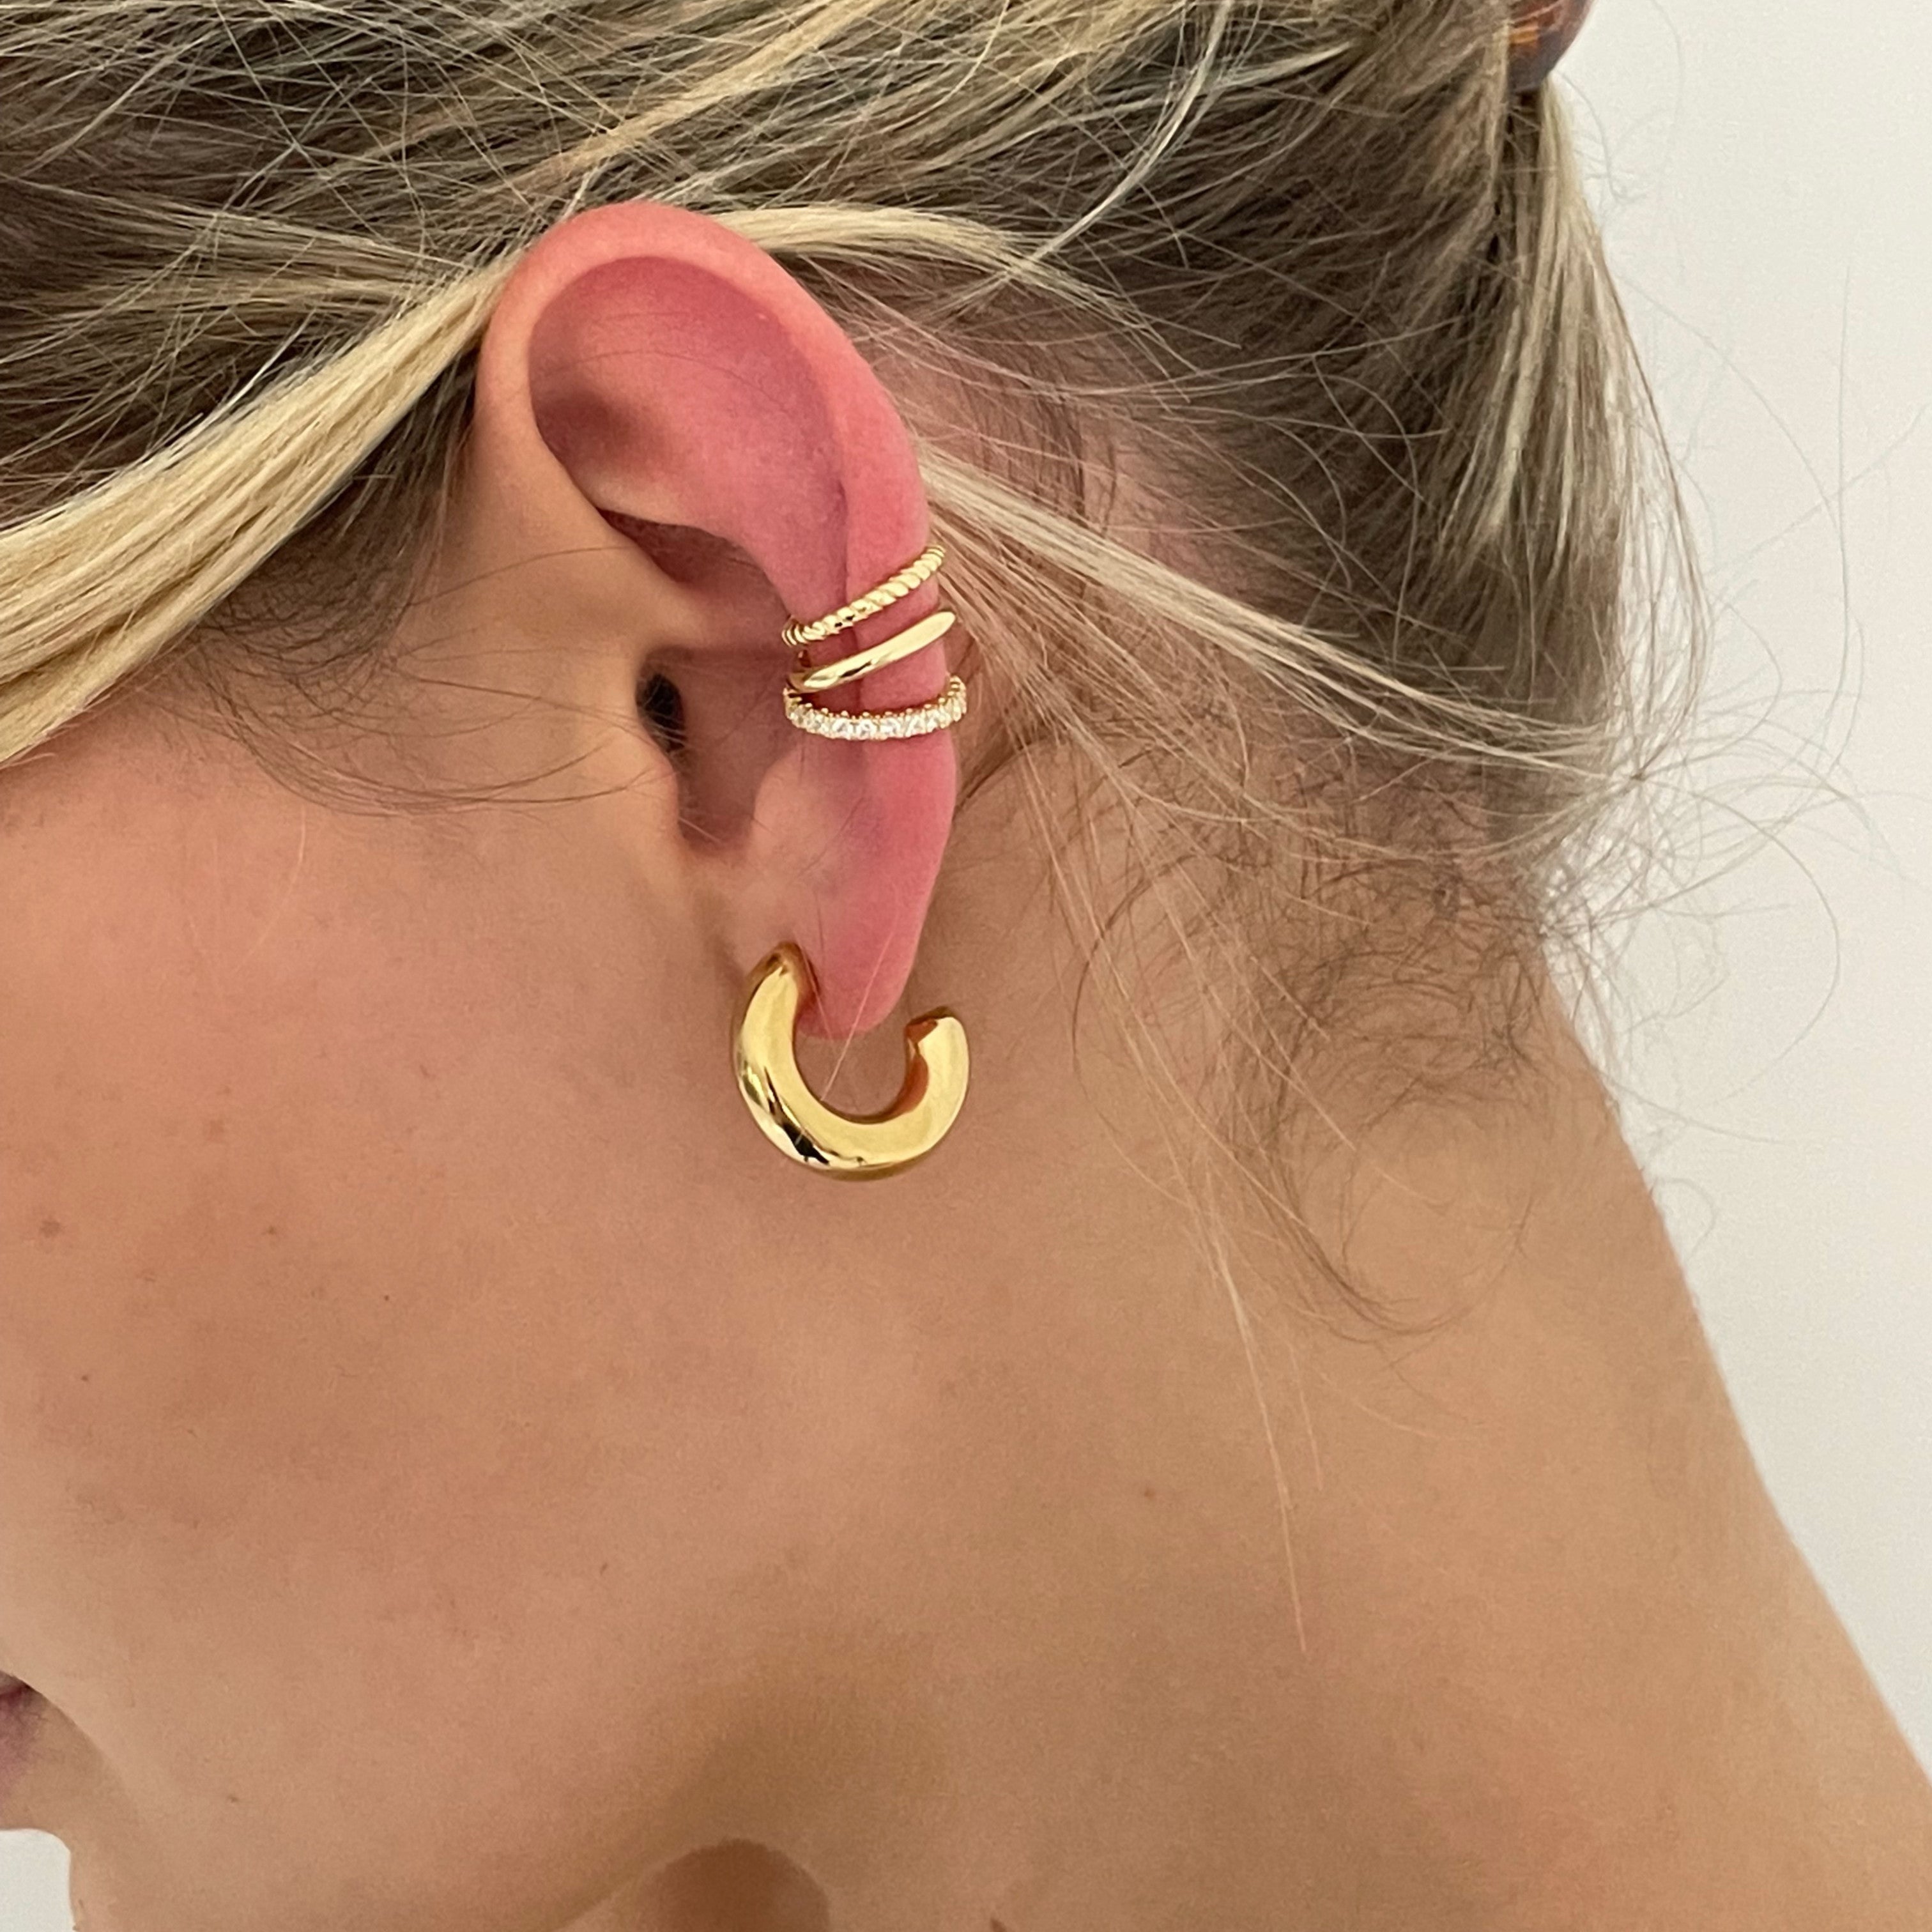 Chunky gold hoop earrings featuring intricate designs for a bold statement